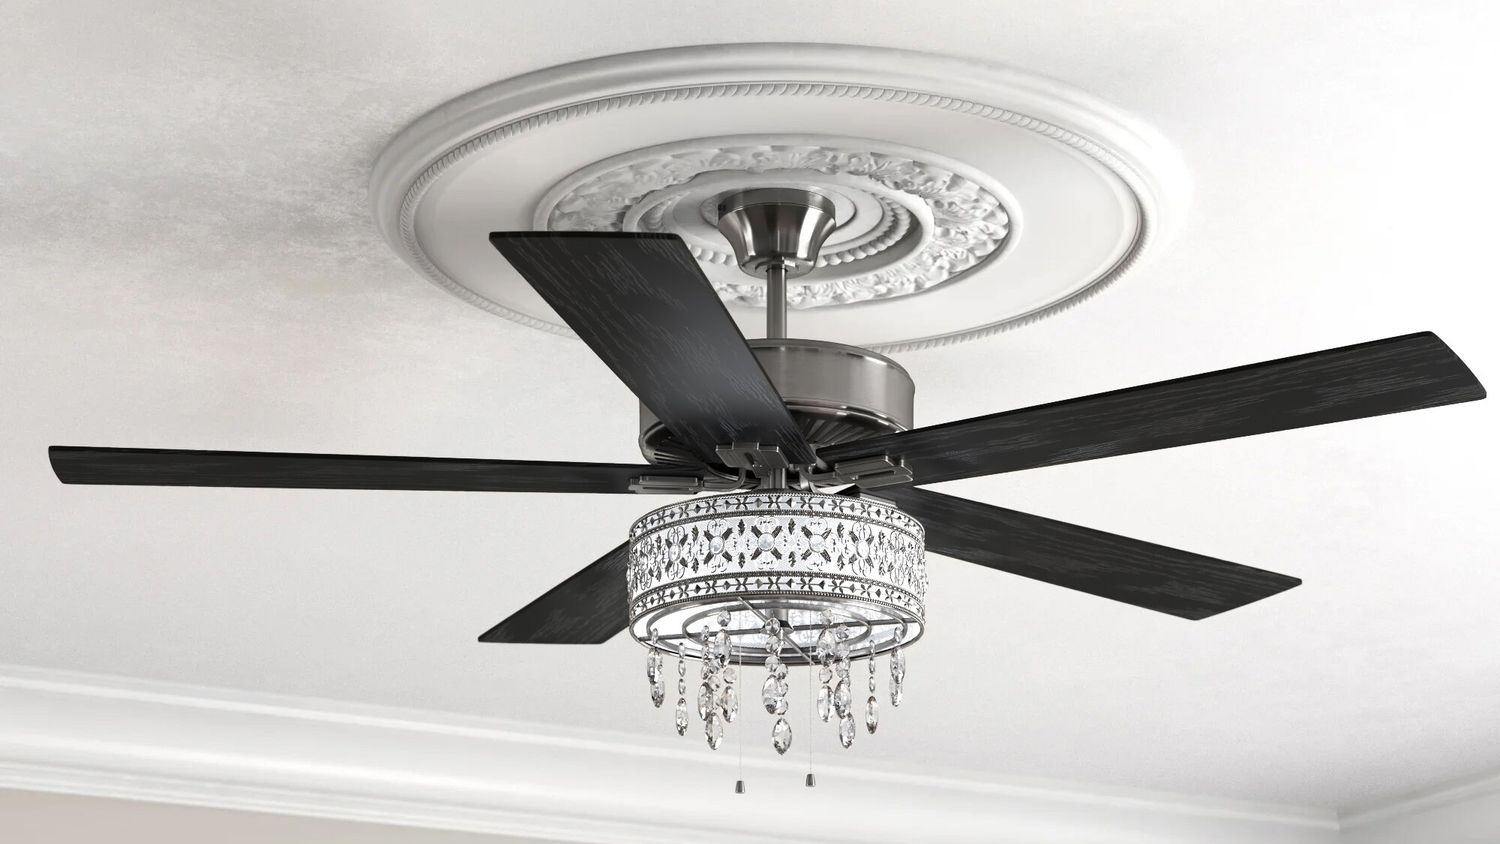 The 10 Best Ceiling Fans In 2021, Which Is The Best Brand For Ceiling Fans